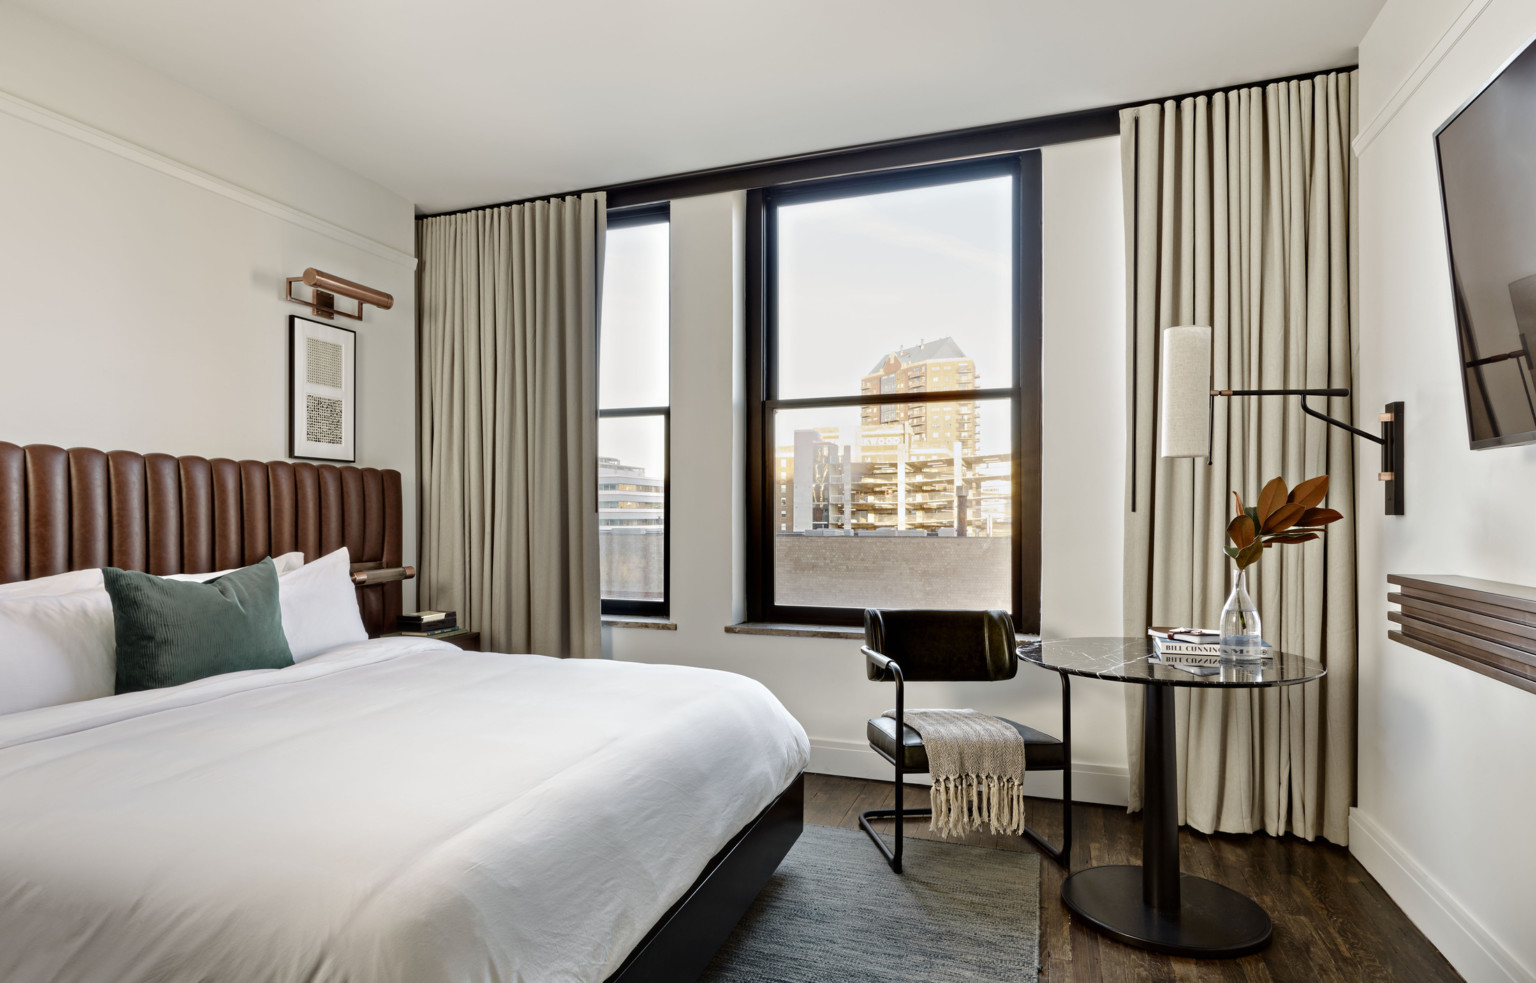 White room with bed with brown headboard, round black table and black cesca chair next to window with view of tall buildings.